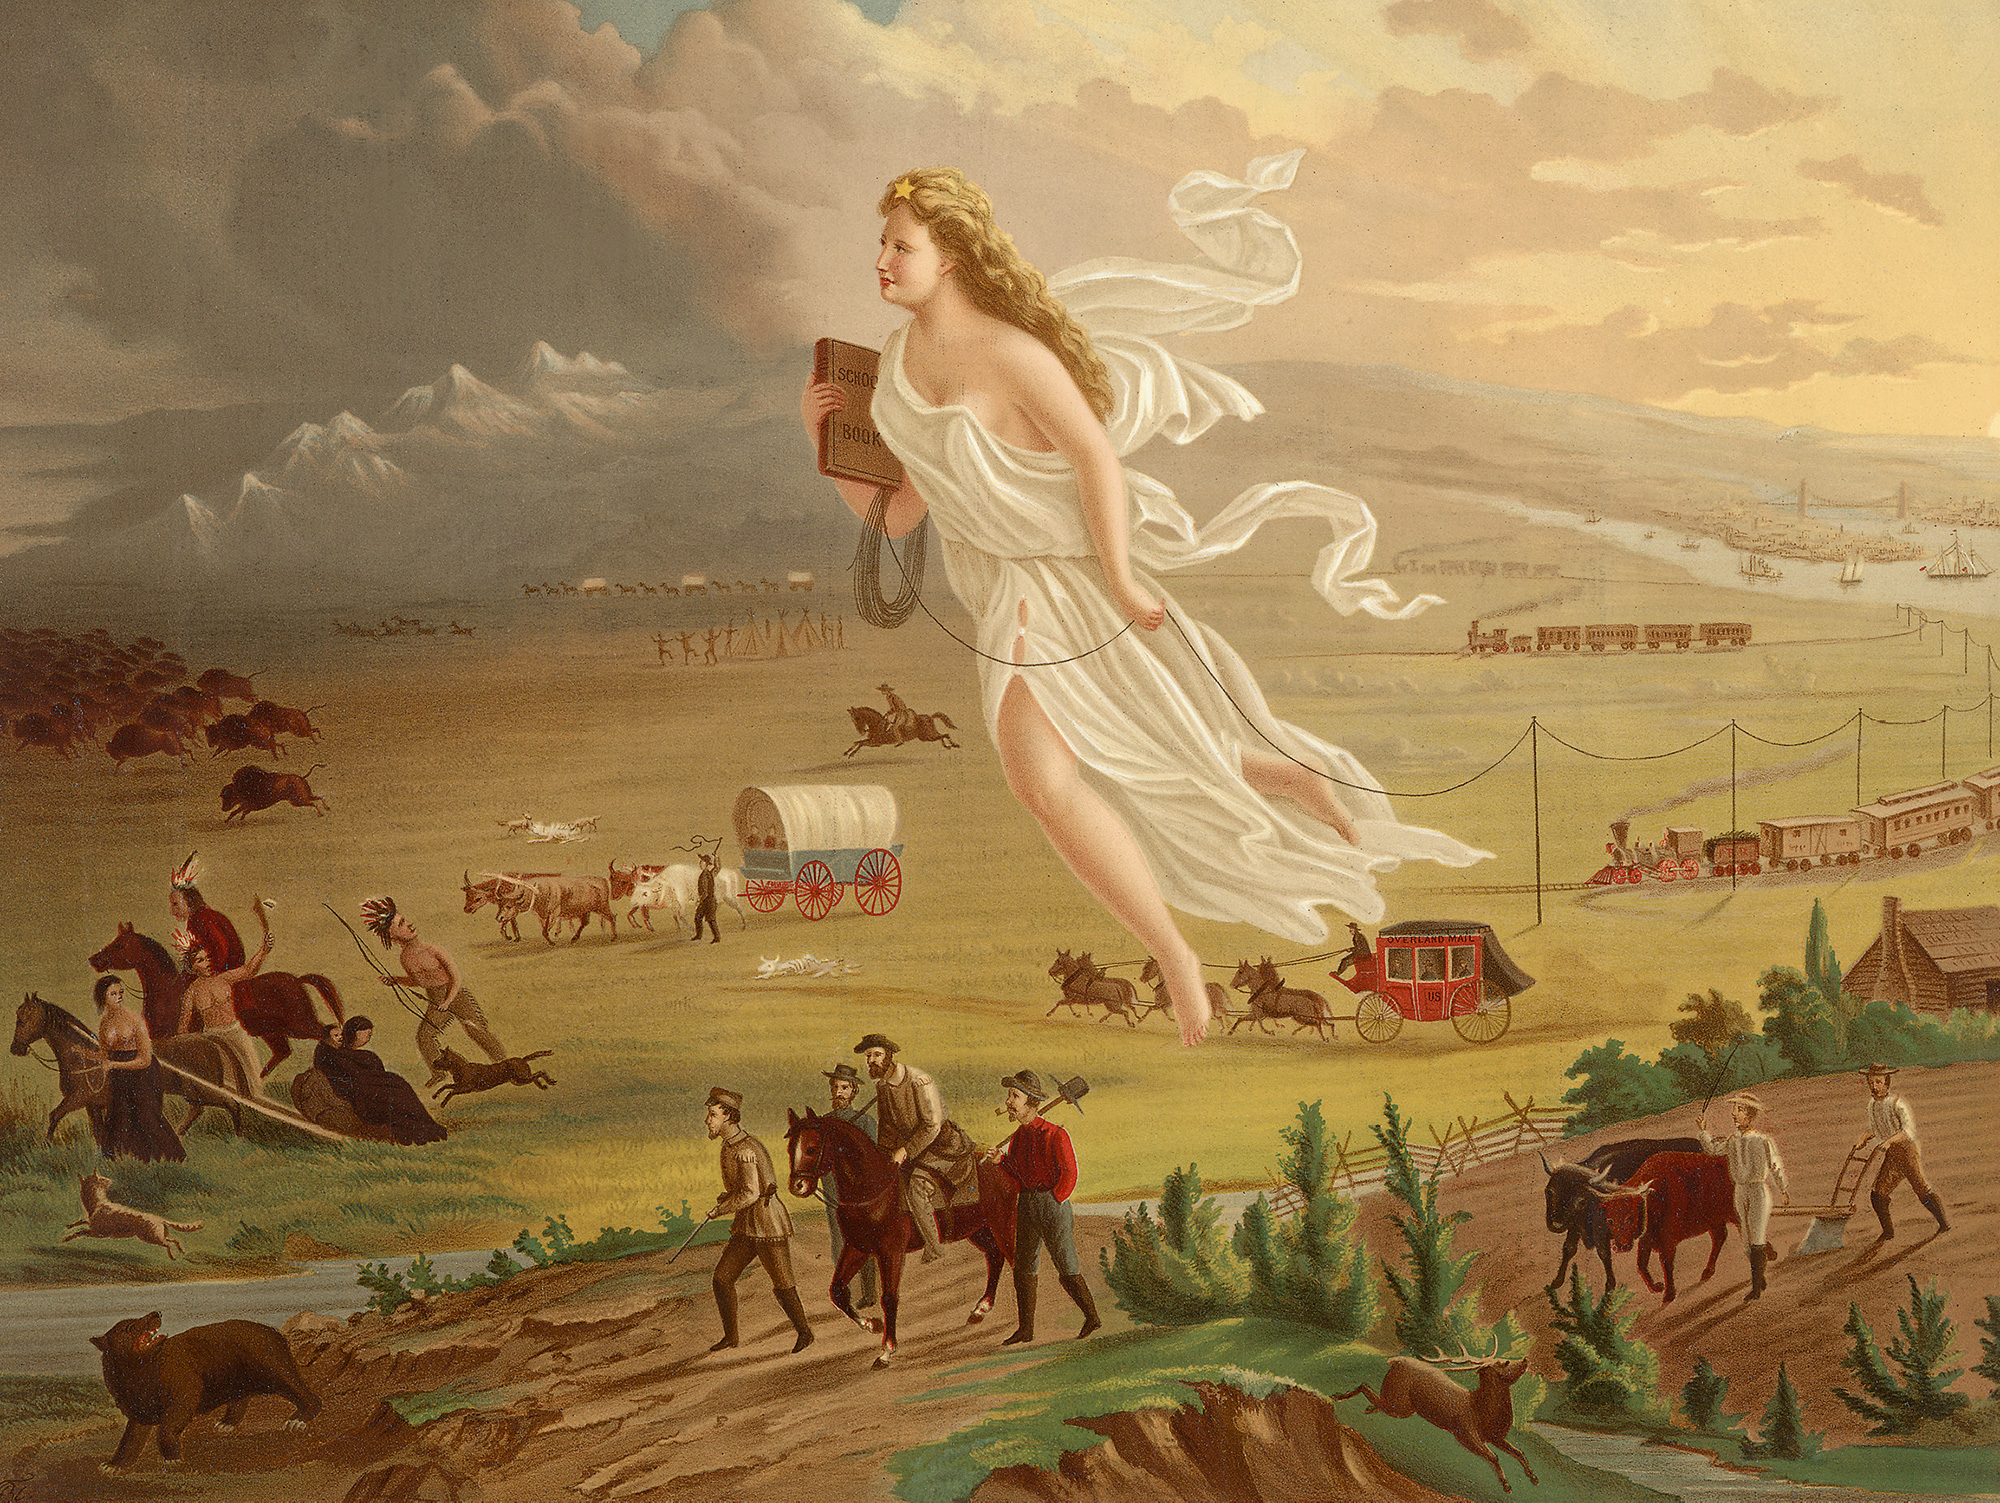 Chromolithograph by George A. Crofutt, after John Gast’s eighteen seventy-two painting “American Progress.” Columbia, the personification of the United States, leads the way by stringing telegraph wire as she sweeps west.